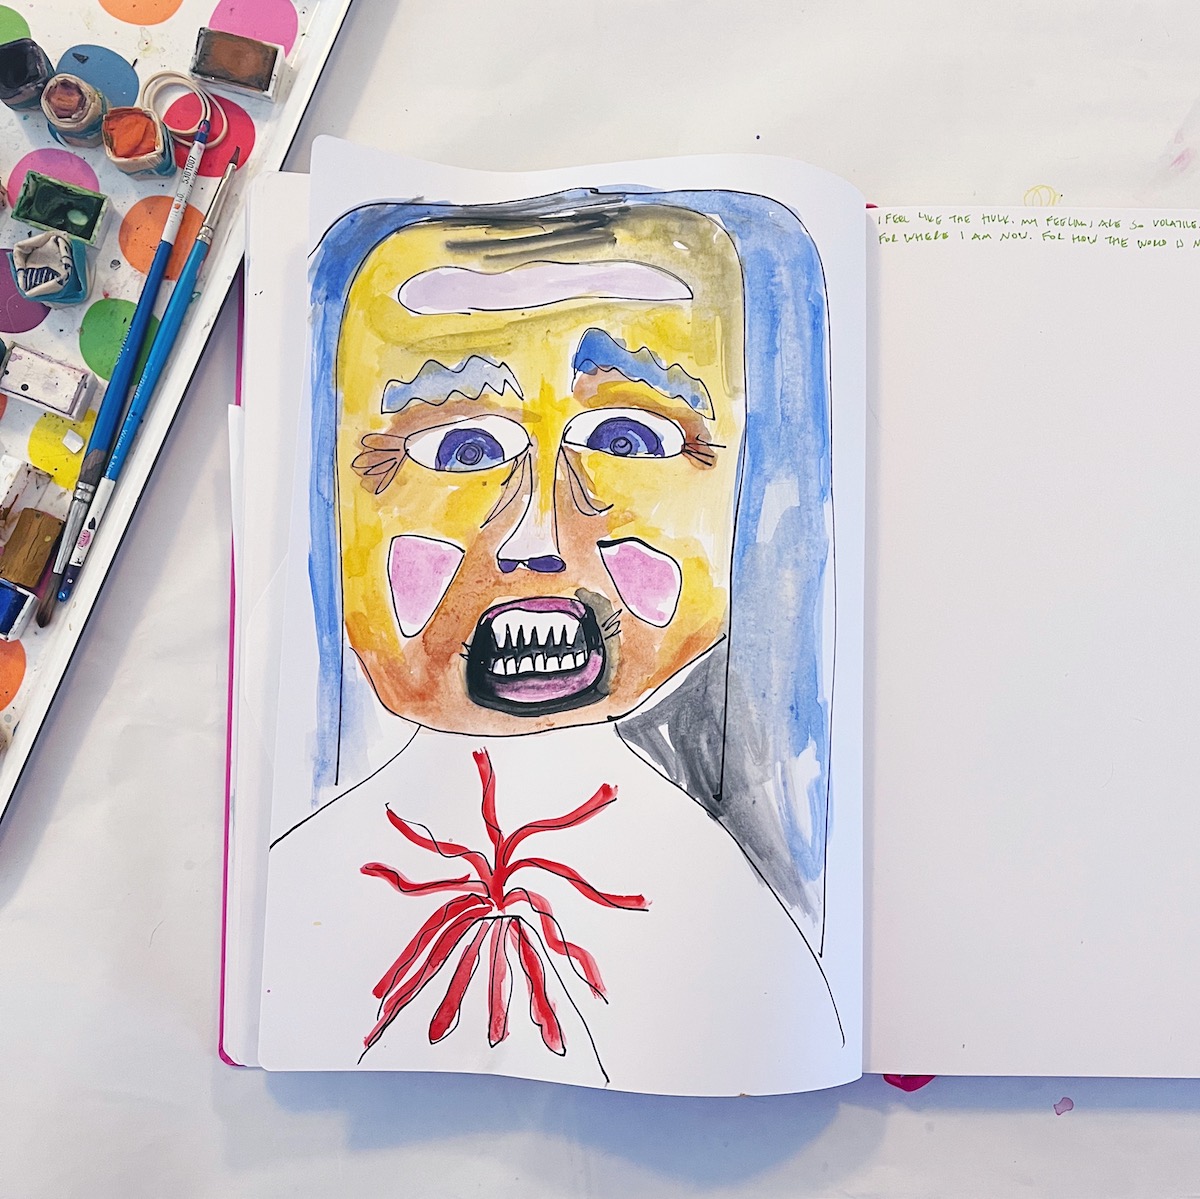 A self portrait of my volatile feelings, from this morning in my journal.